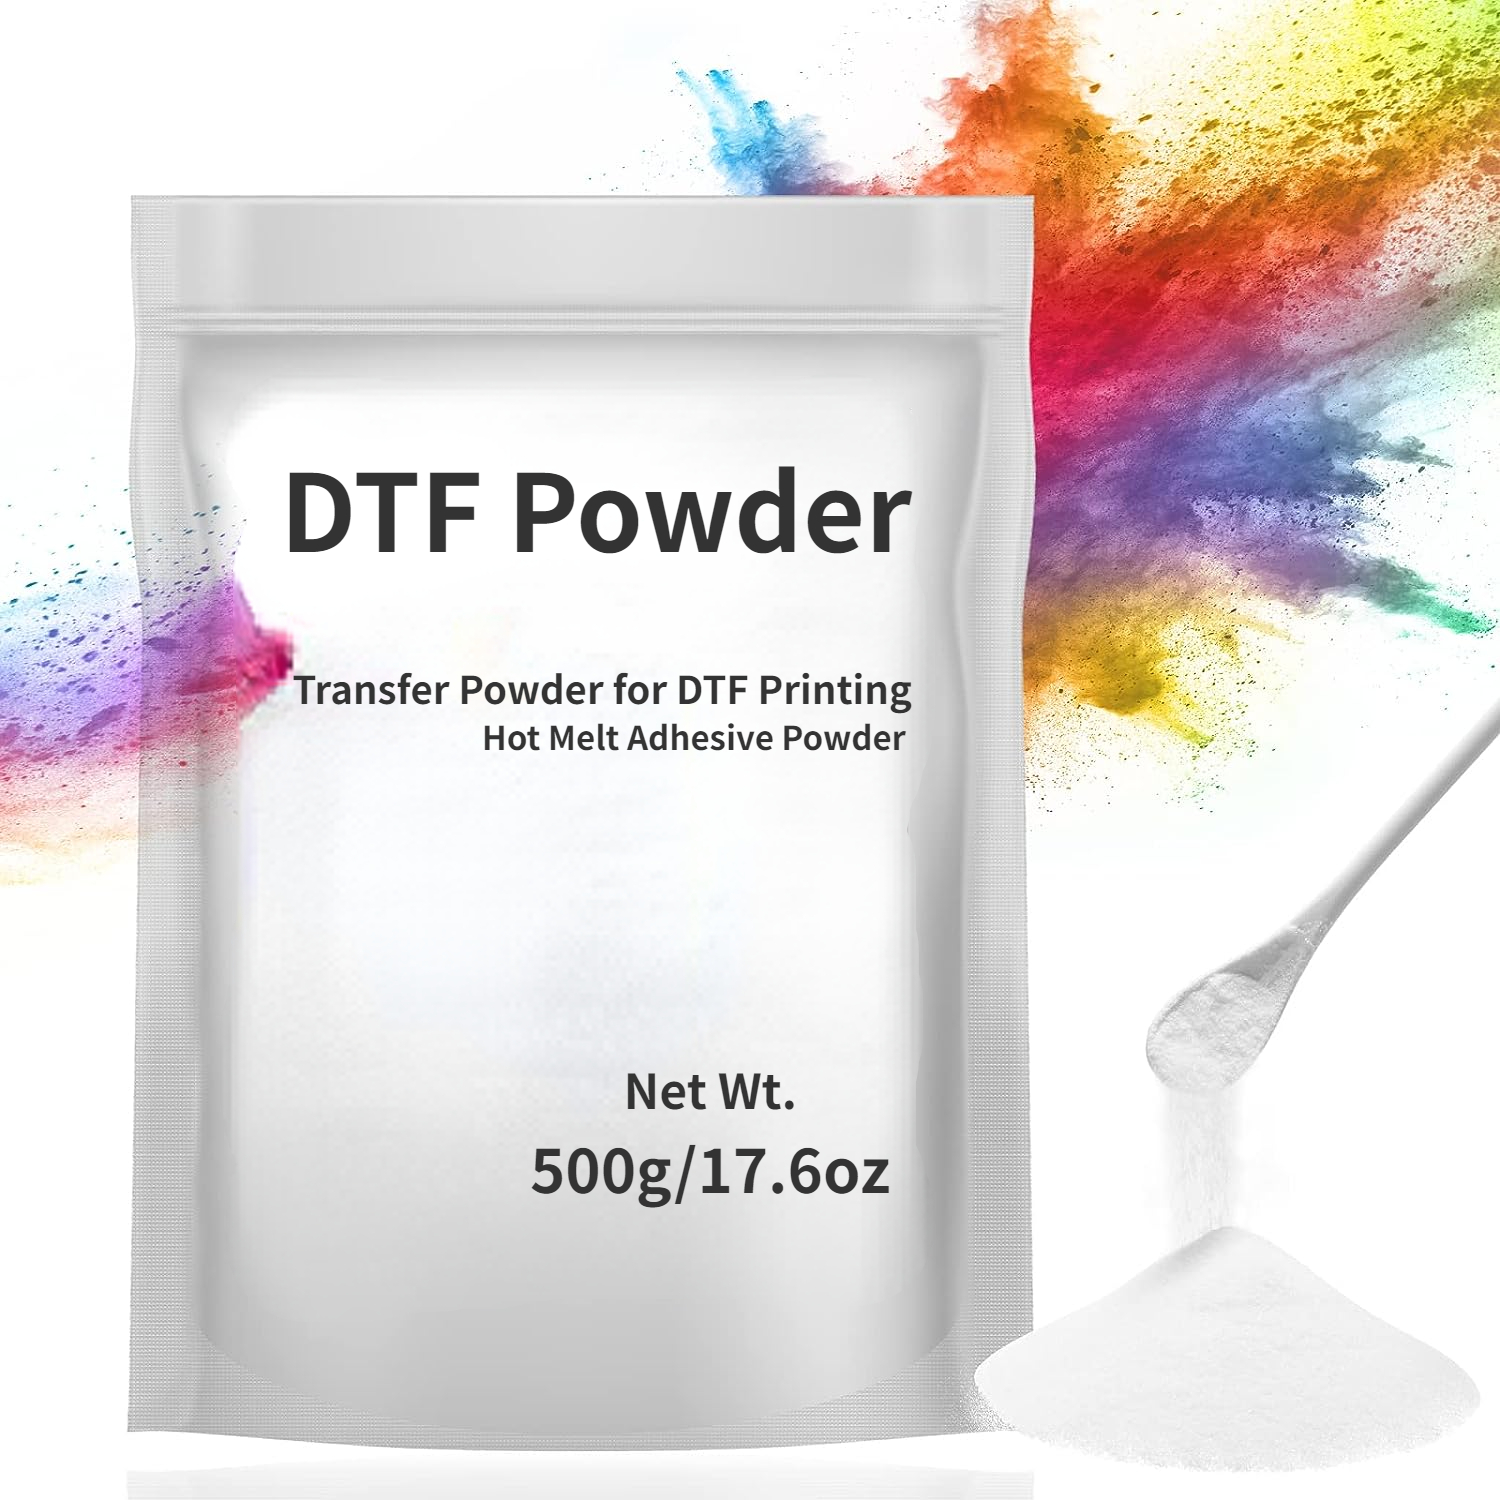 DTF Powder Digital Transfer Hot Melt Adhesive 500g, DTF Transfer Powder  Transfer Printer Direct Print on All Fabric, DTF Powder for Sublimation on